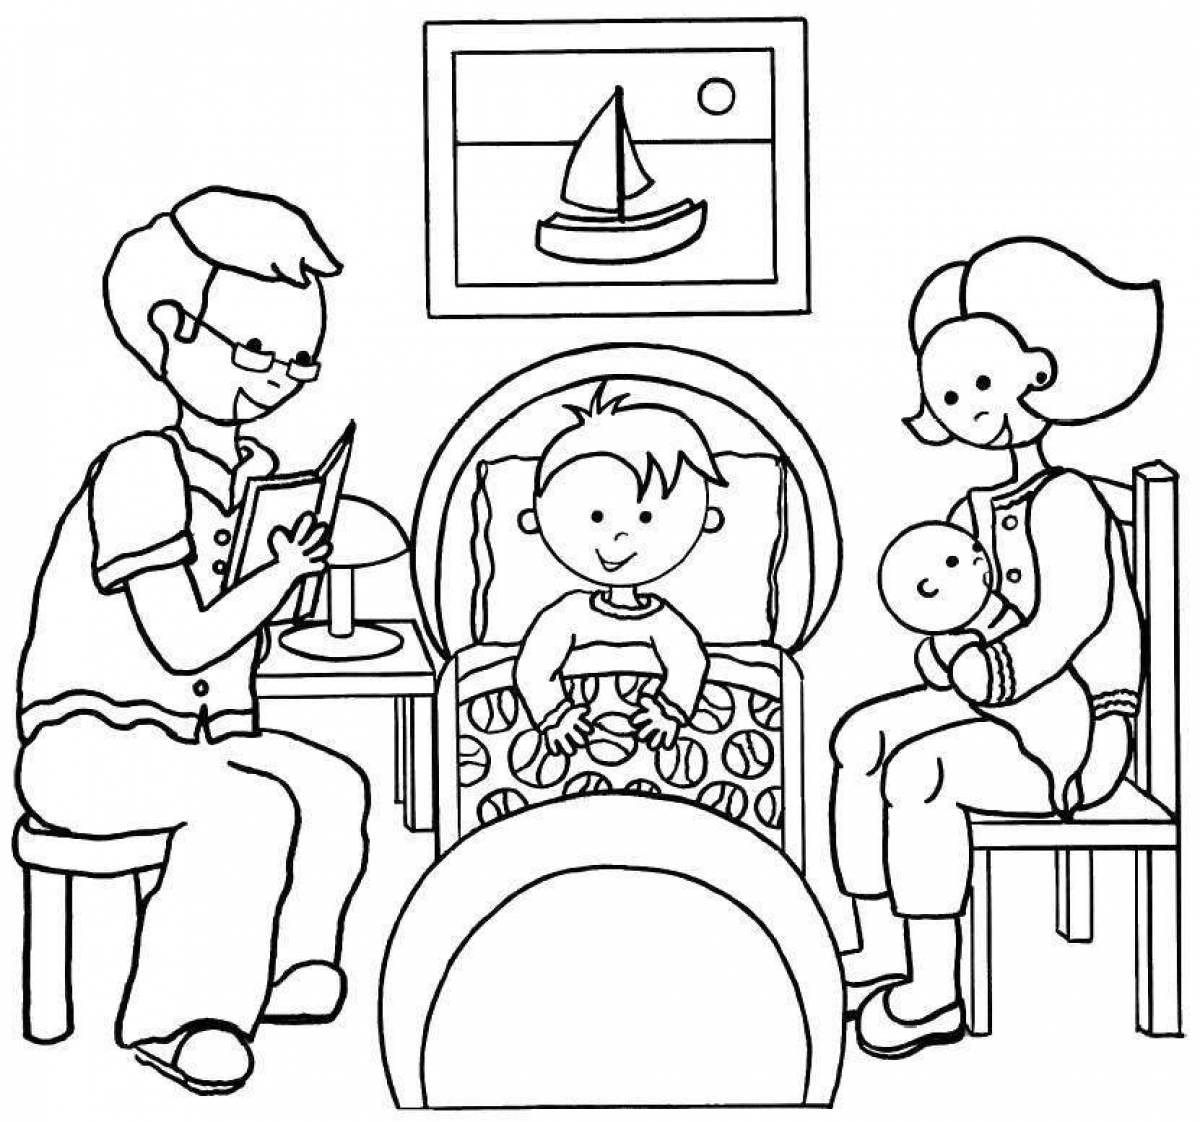 A fun family coloring book for kids aged 5-6